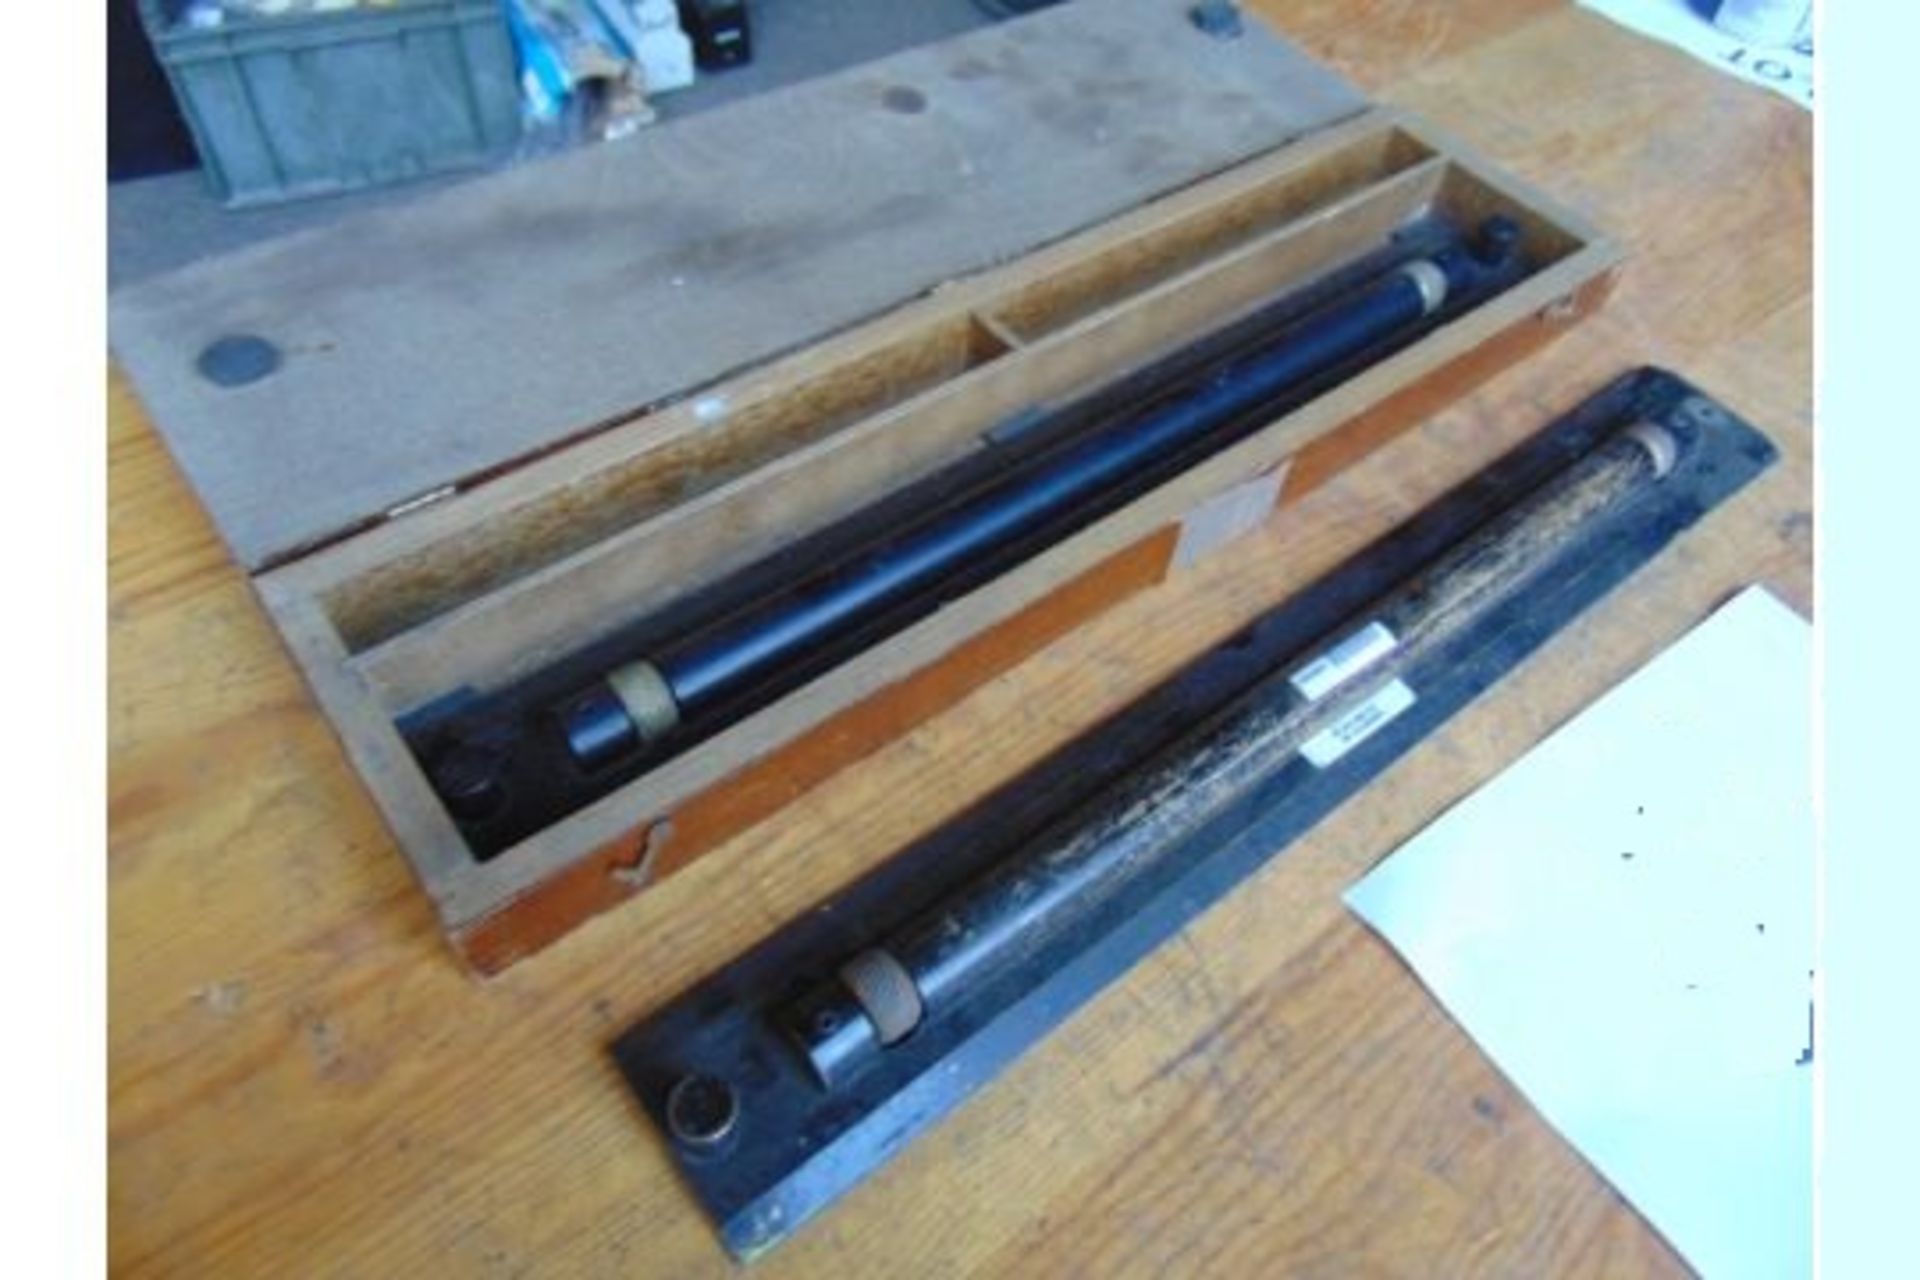 2 x Antique Parallel Navigation Rulers in Original Wooden Box - Image 3 of 6